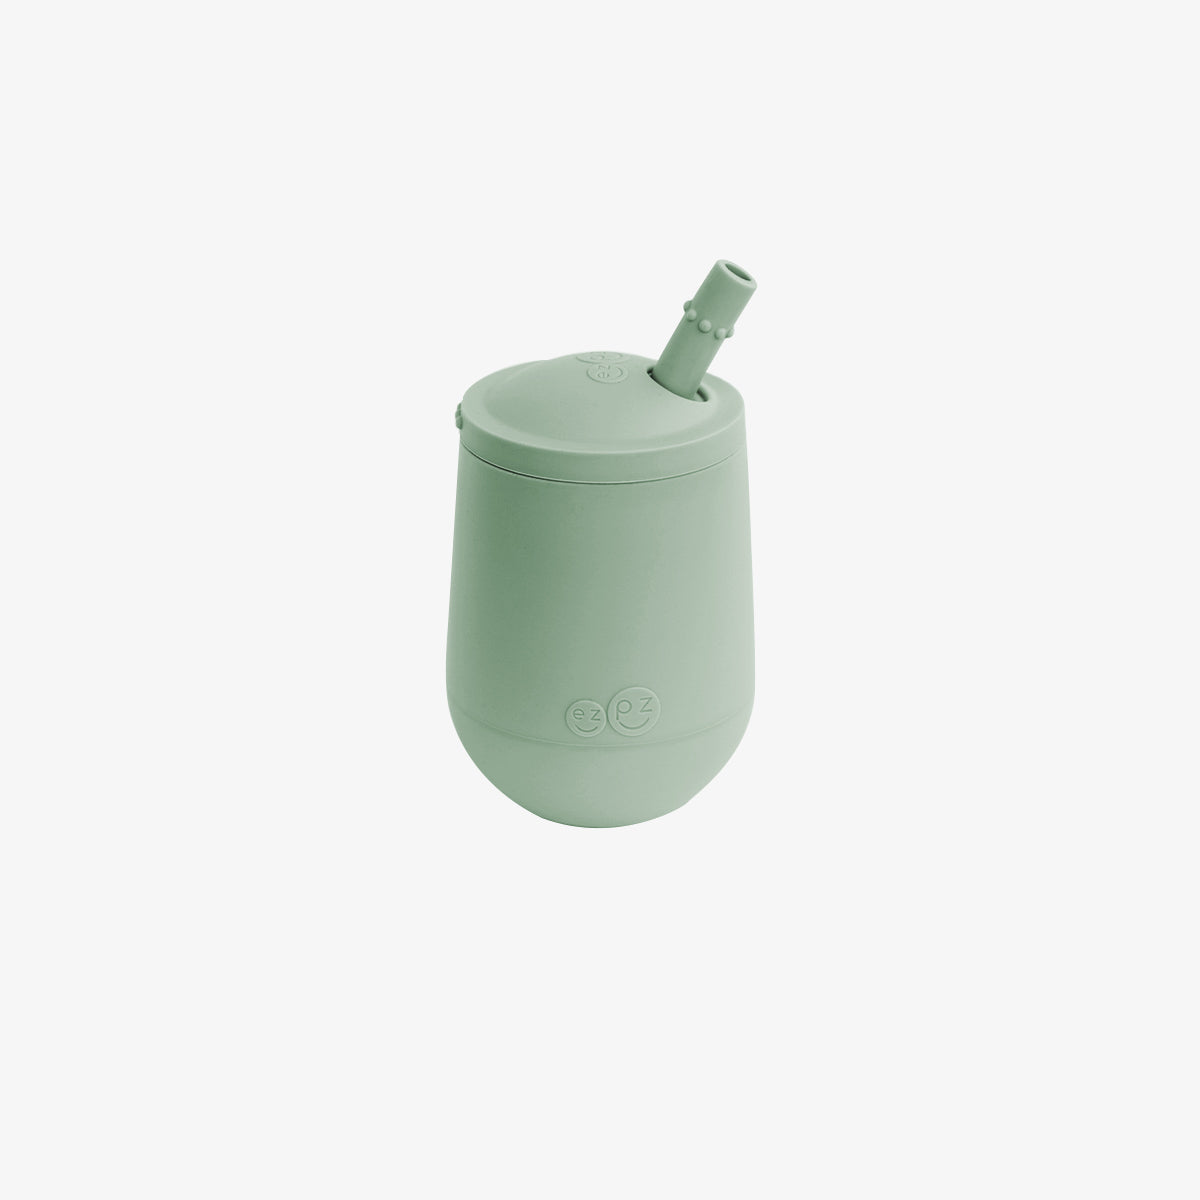 The Mini Cup + Straw in Sage by ezpz / Silicone Drinking Cup and Straw Training System for Toddlers